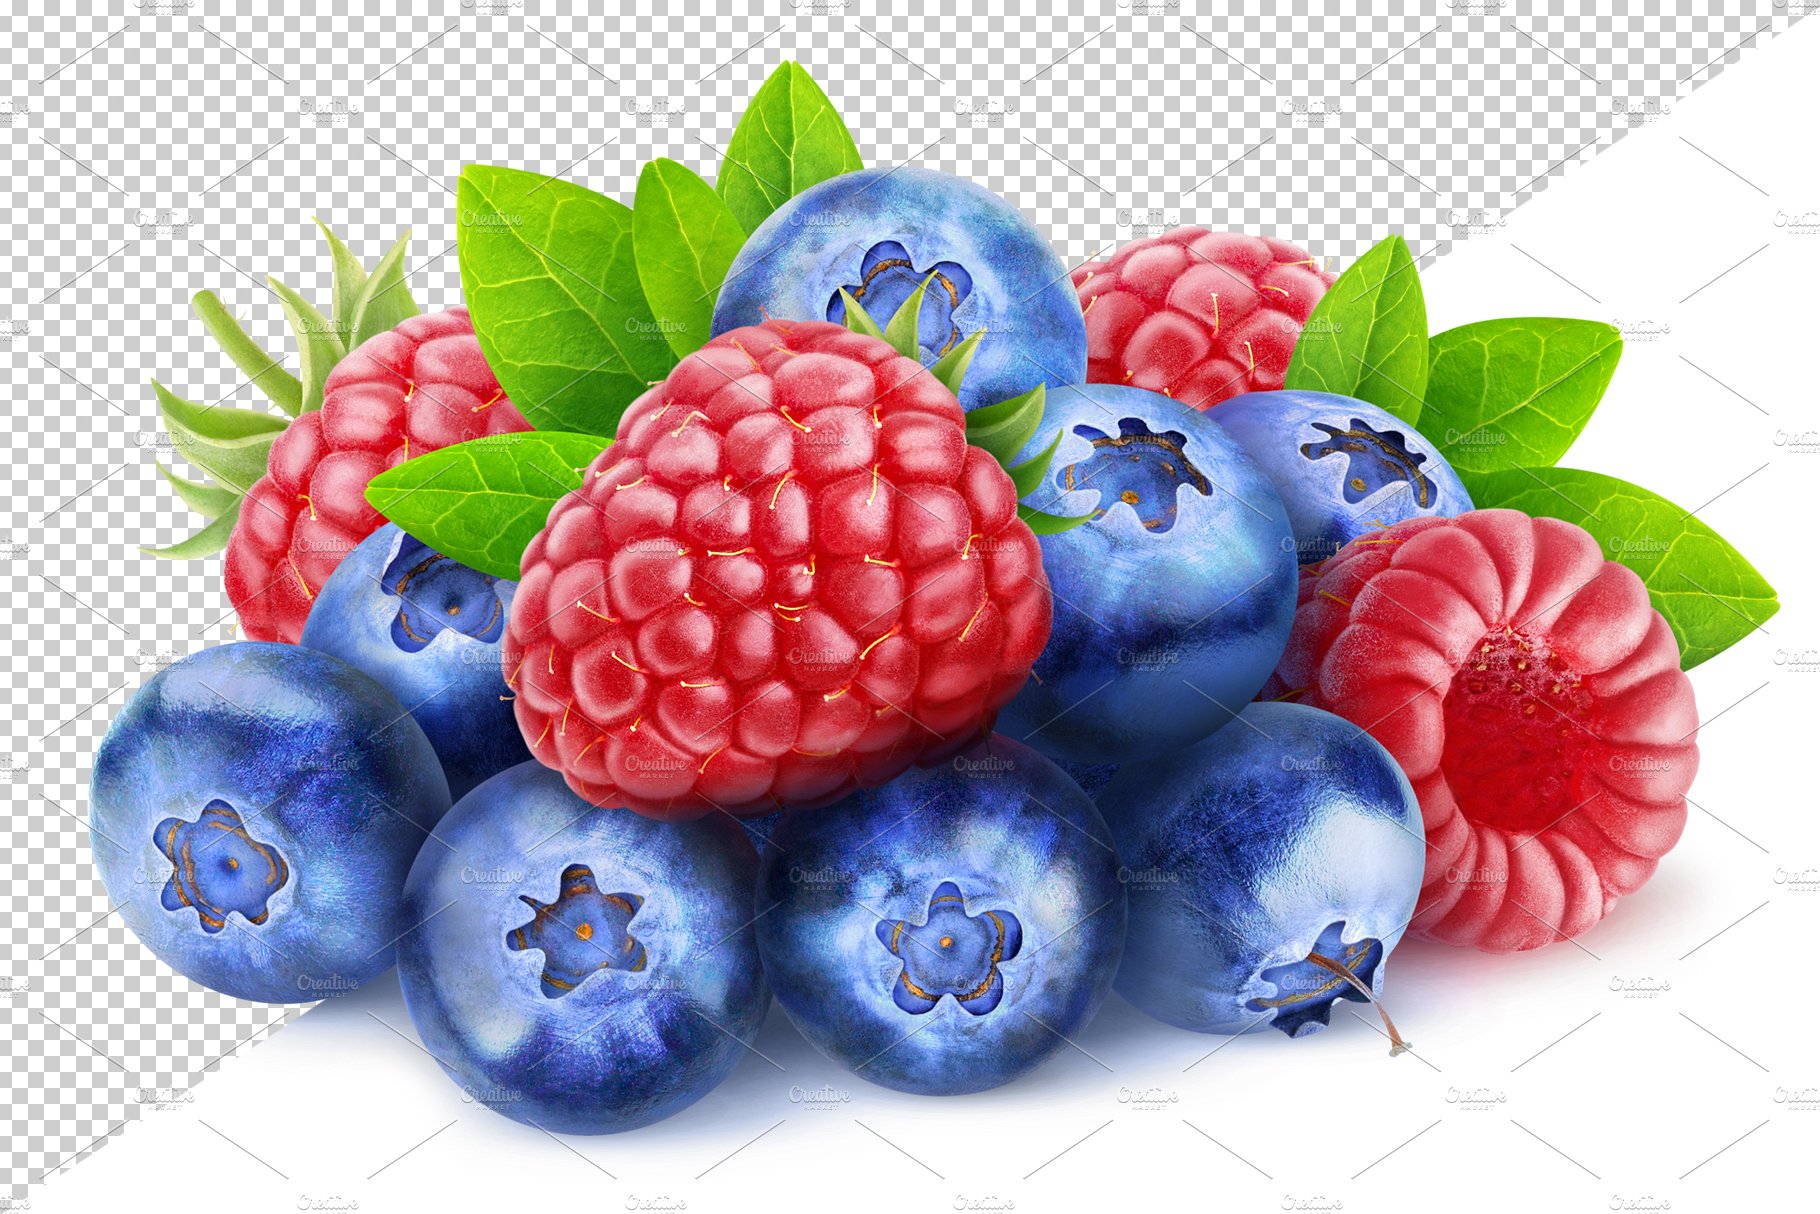 Blueberry and raspberry preview image.